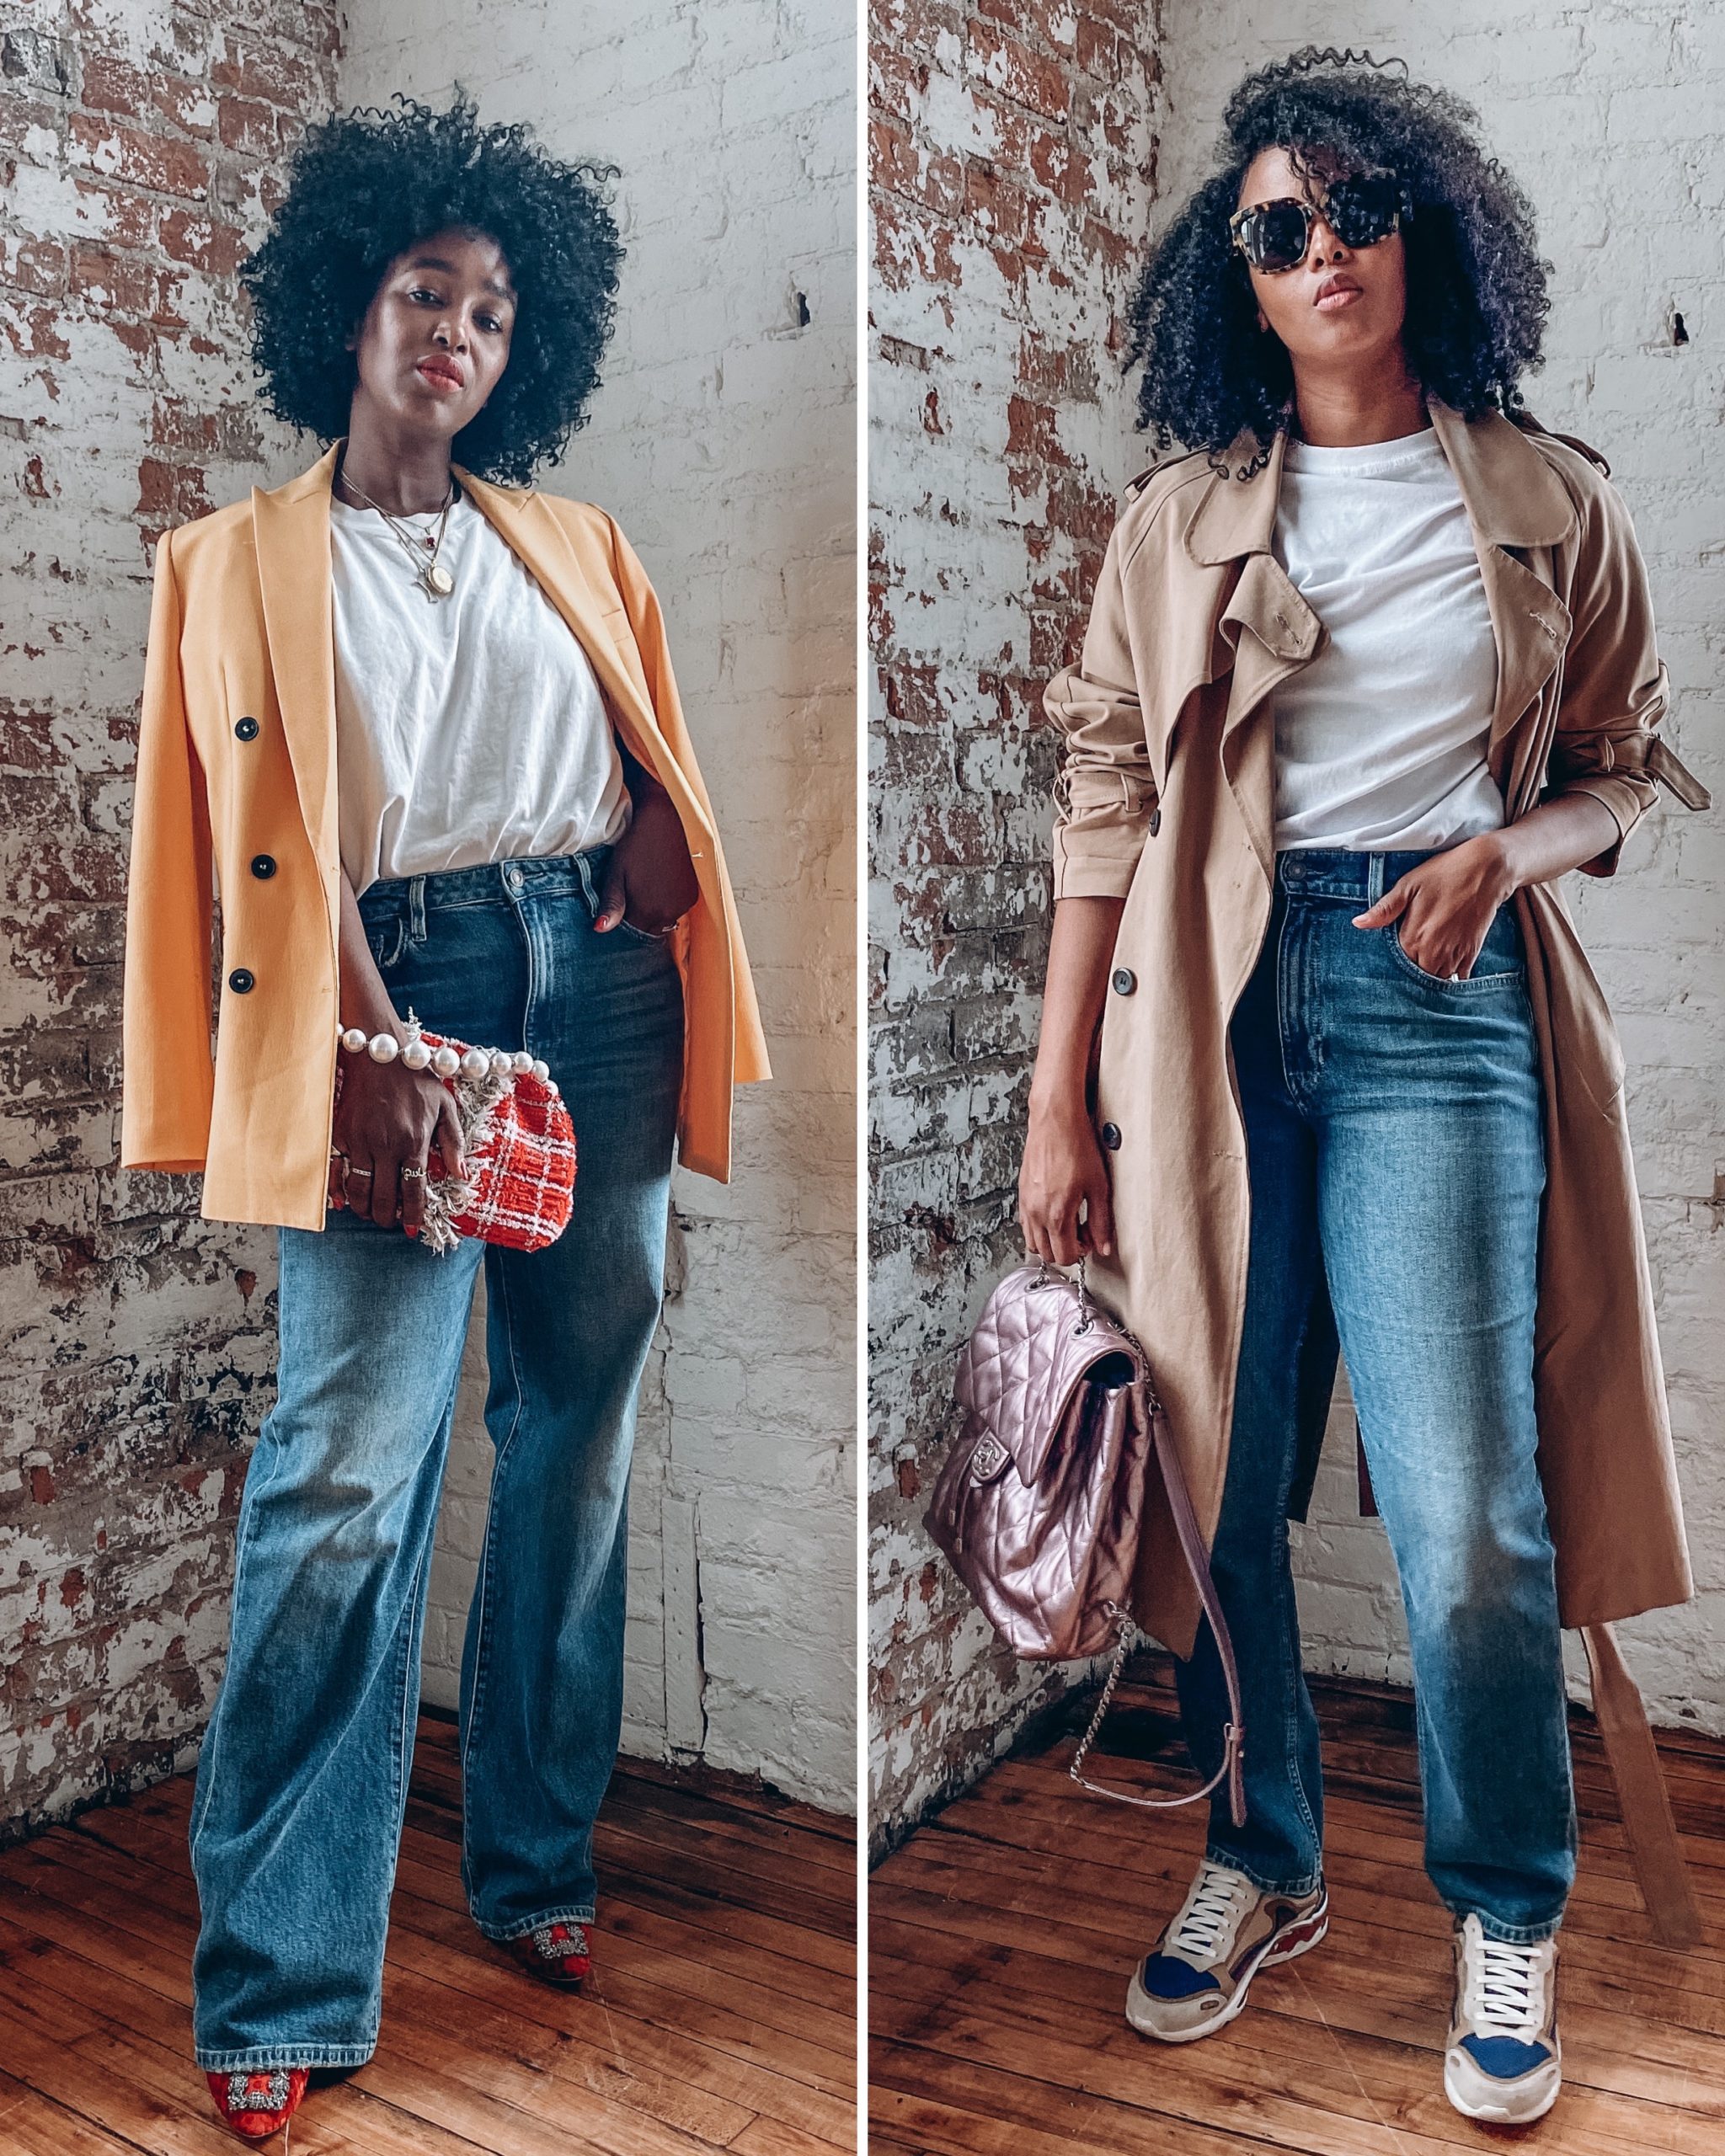 How To Style Your Jeans - A Quick Guide